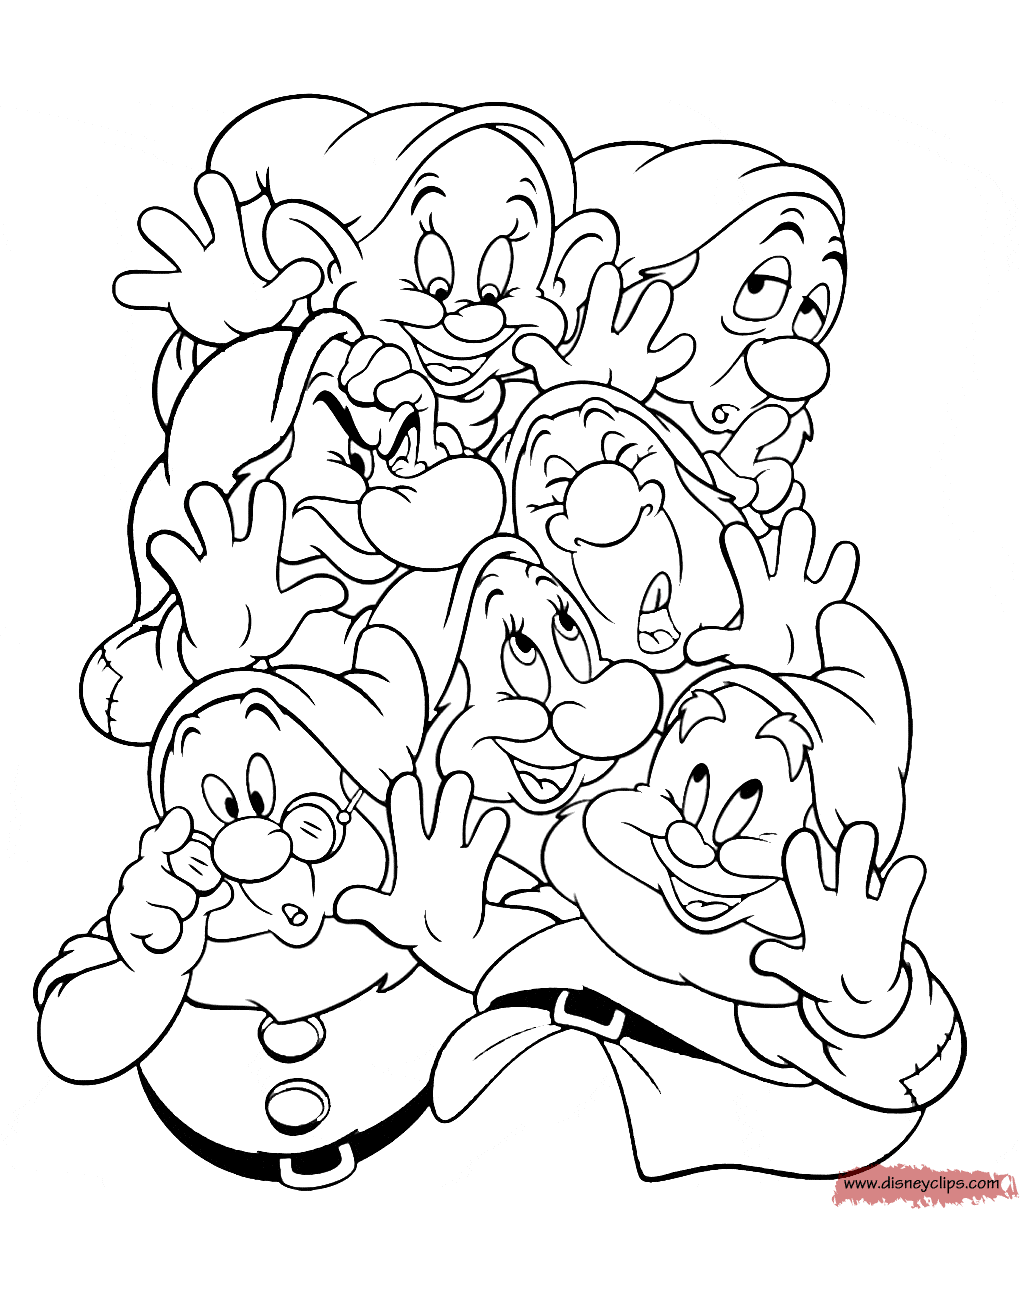 snow white and seven dwarfs coloring pages snow white and the seven dwarfs coloring pages 4 seven pages coloring dwarfs white and snow 